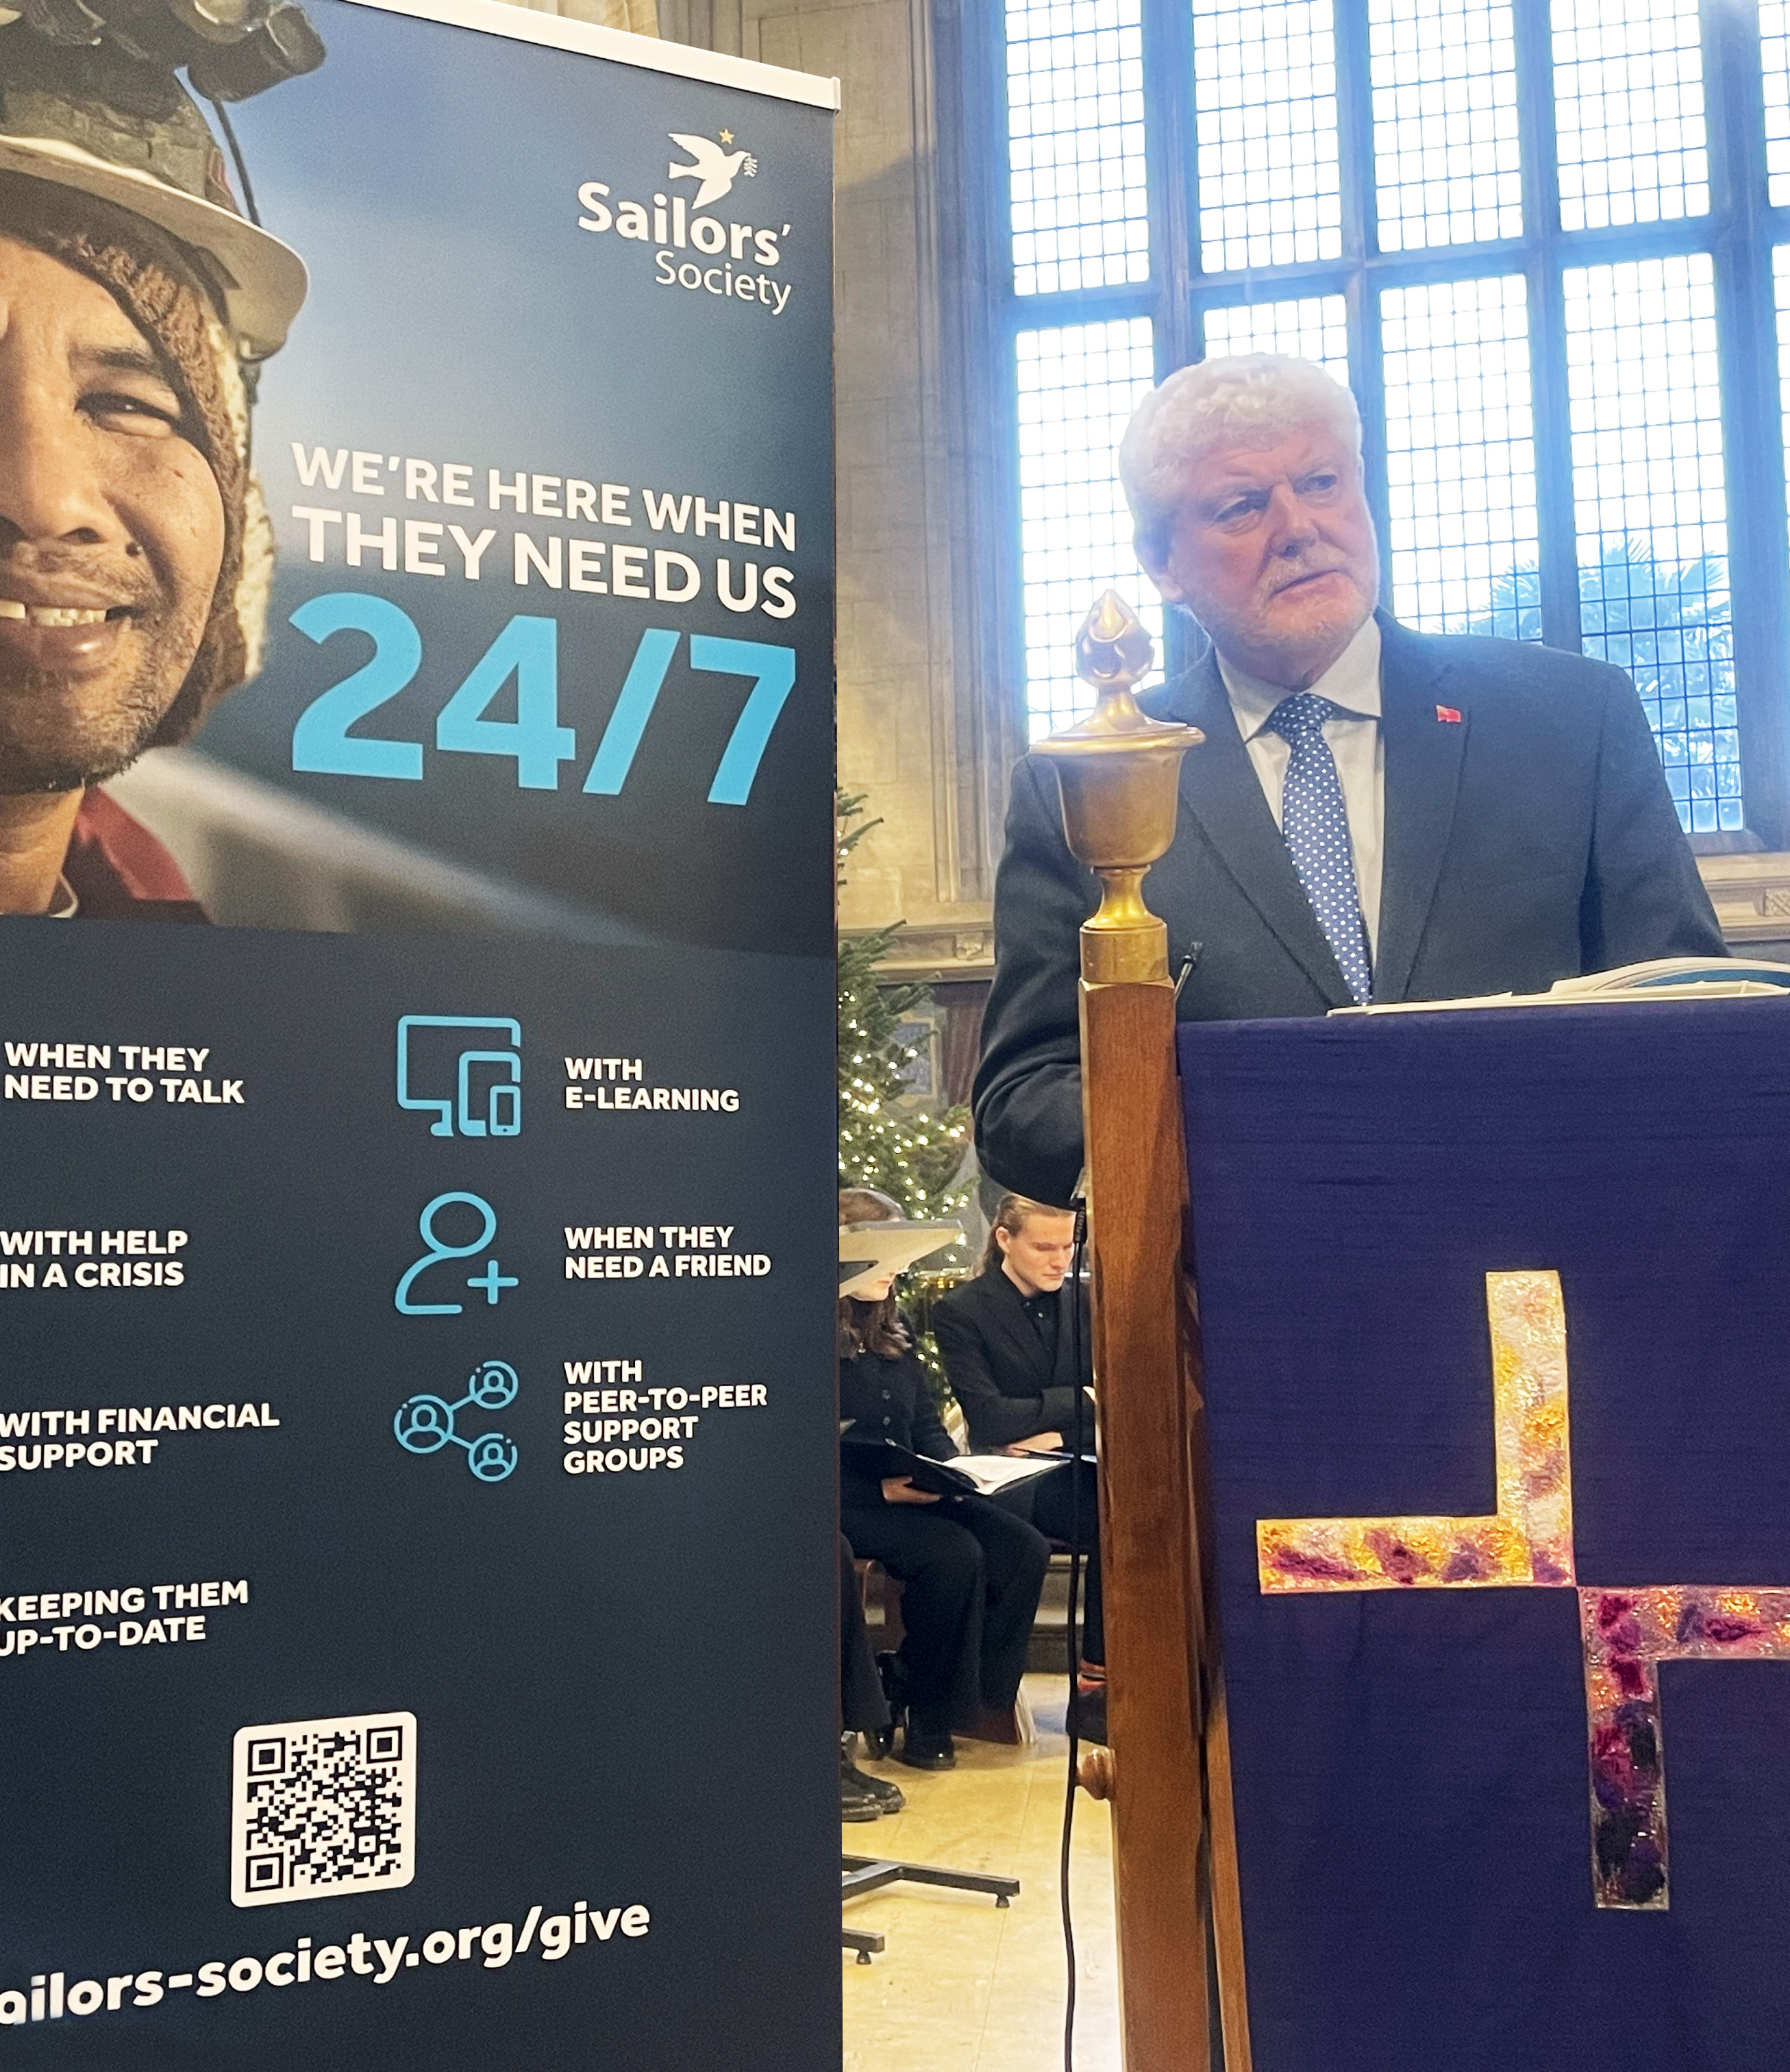 New UK Maritime Minister speaks first to the industry at Sailors’ Society Carol Service